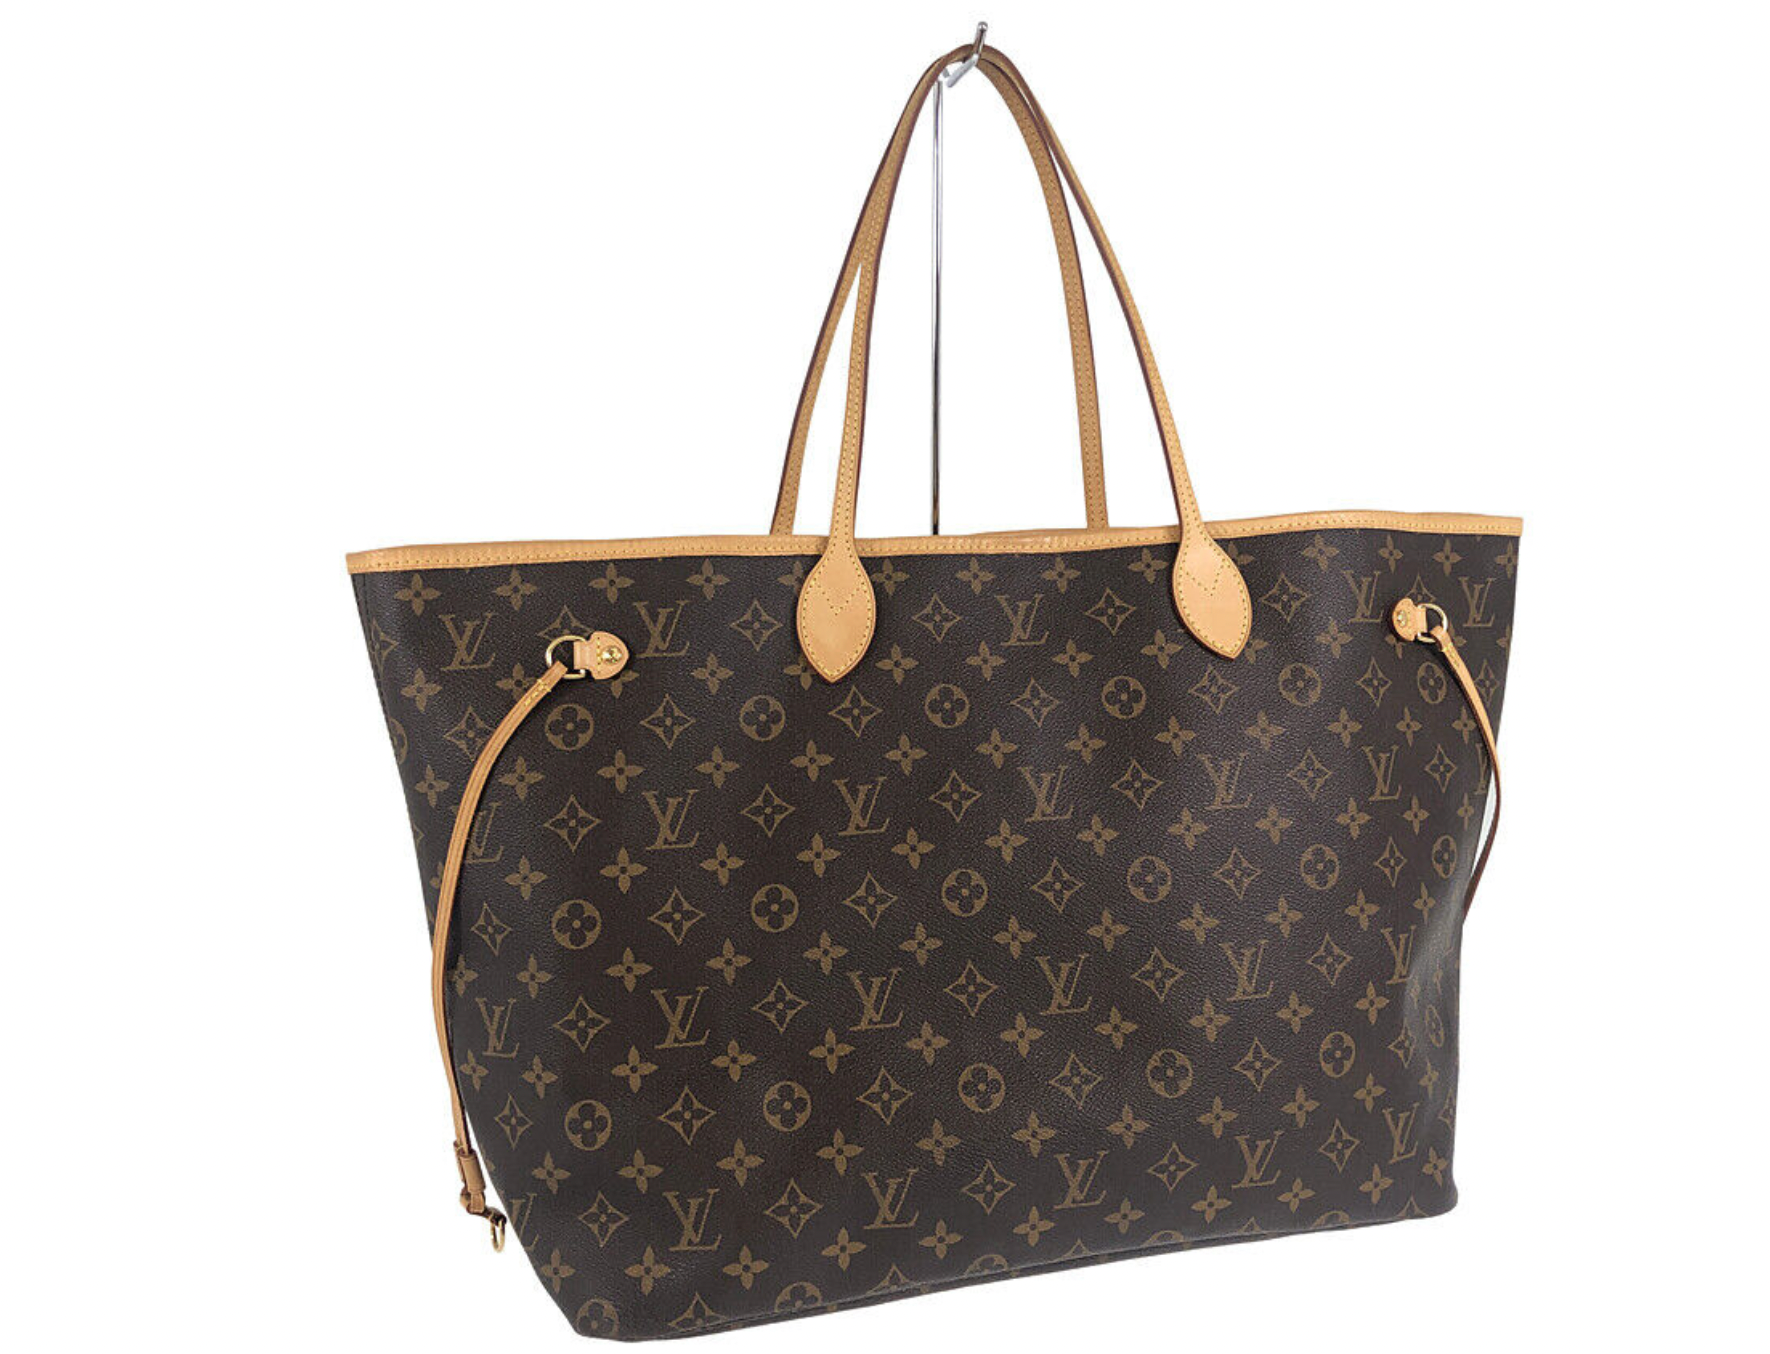 Preloved Louis Vuitton Monogram Neverfull GM Tote Bag TH2037  ***DEAL - $300 OFF